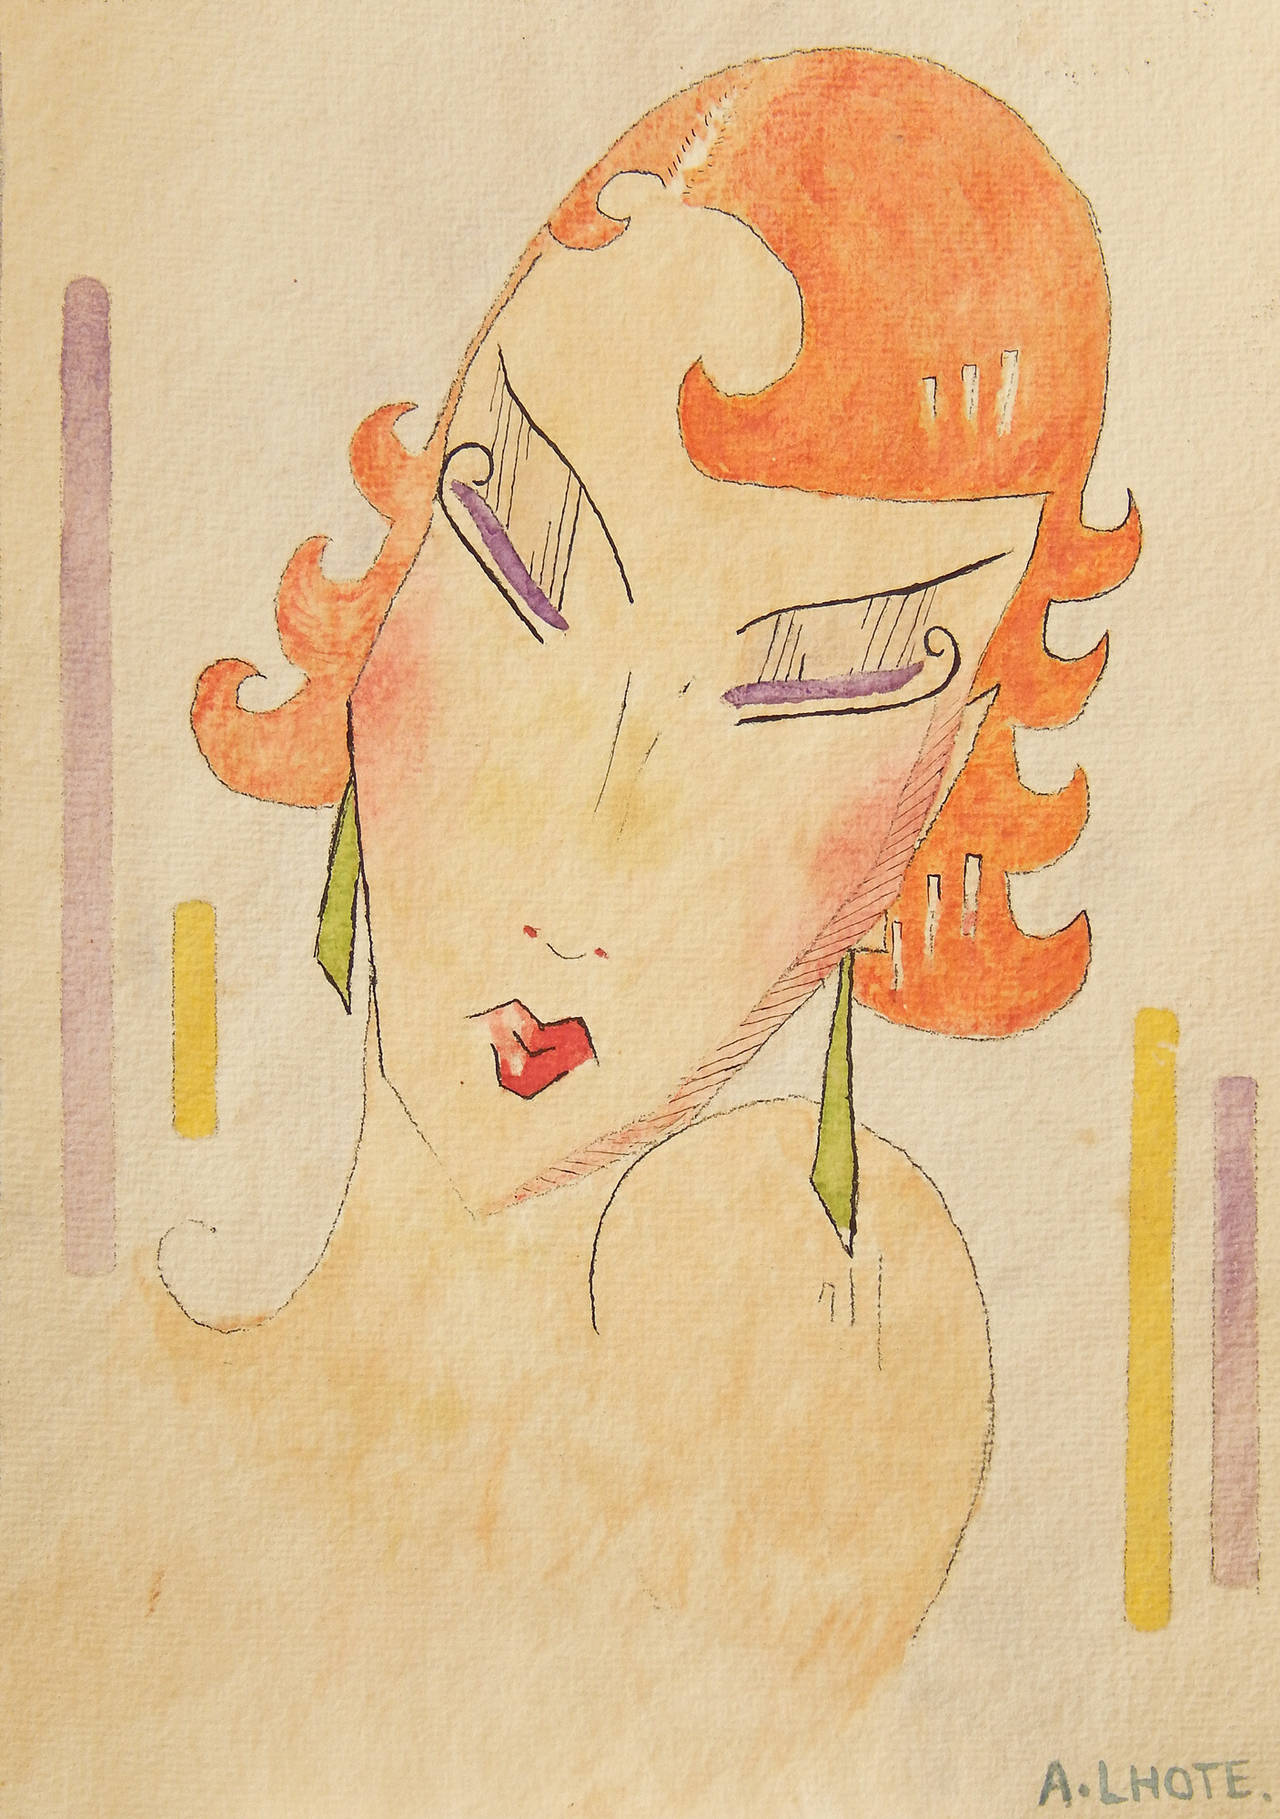 A superb depiction of a young woman at the height of the glamorous Jazz Age in Paris, this ink and watercolor is vibrant and sophisticated.  The artist, André Lhote, best known for ambitious oil paintings, could have thrown together this watercolor